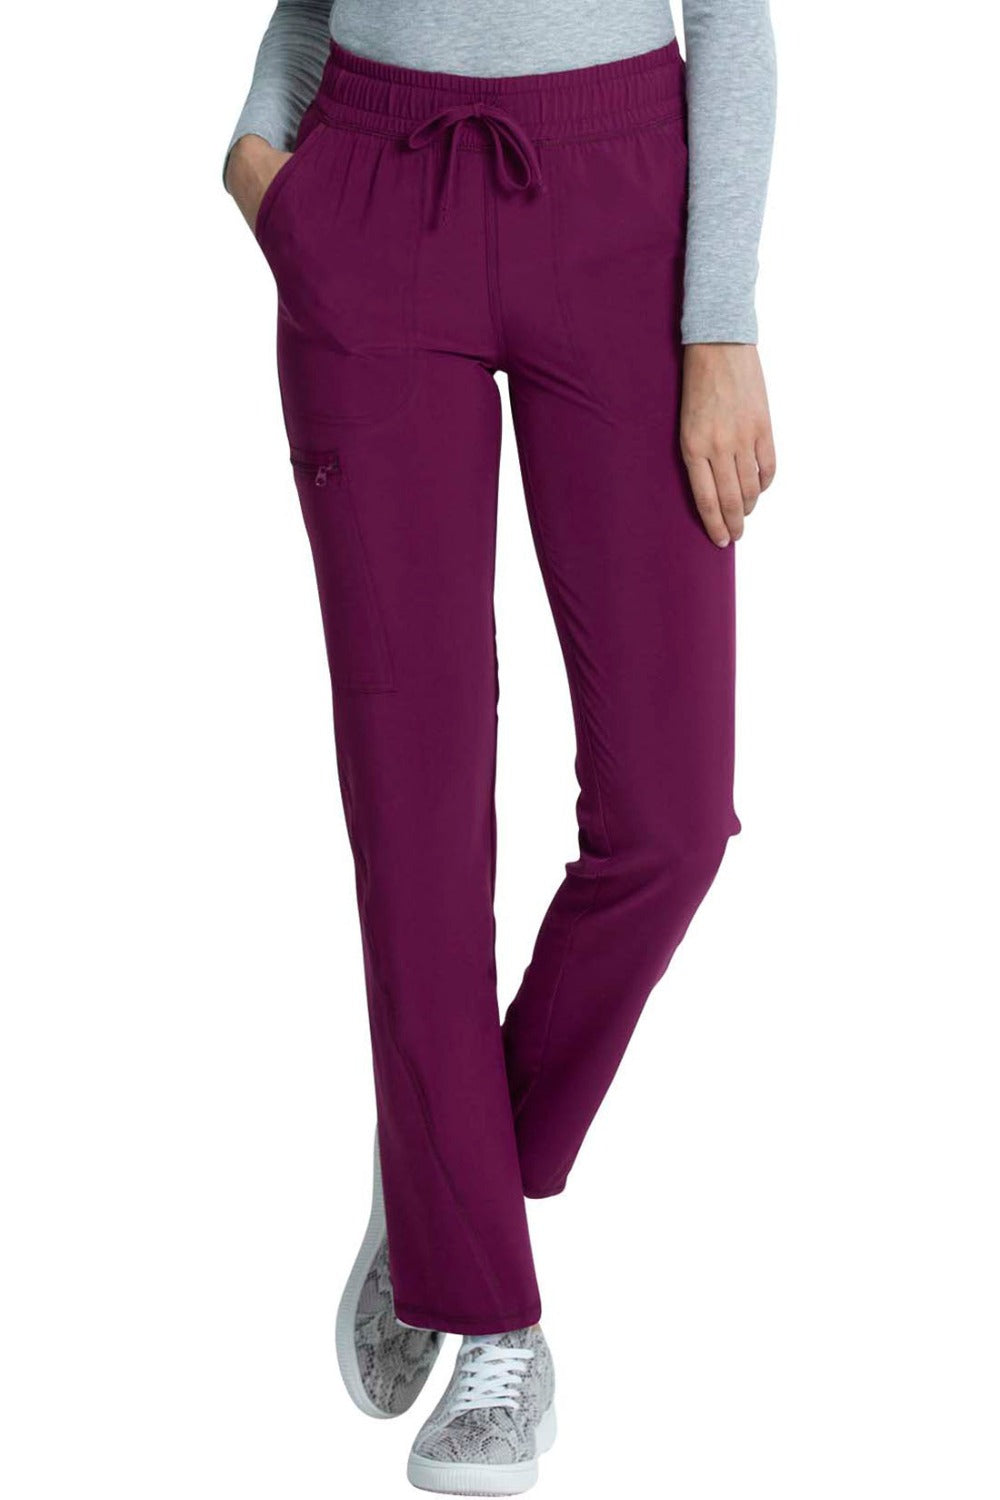 Cherokee Allura Tall Scrub Pant Mid Rise Tapered Leg Drawstring in Wine at Parker's Clothing and Shoes.